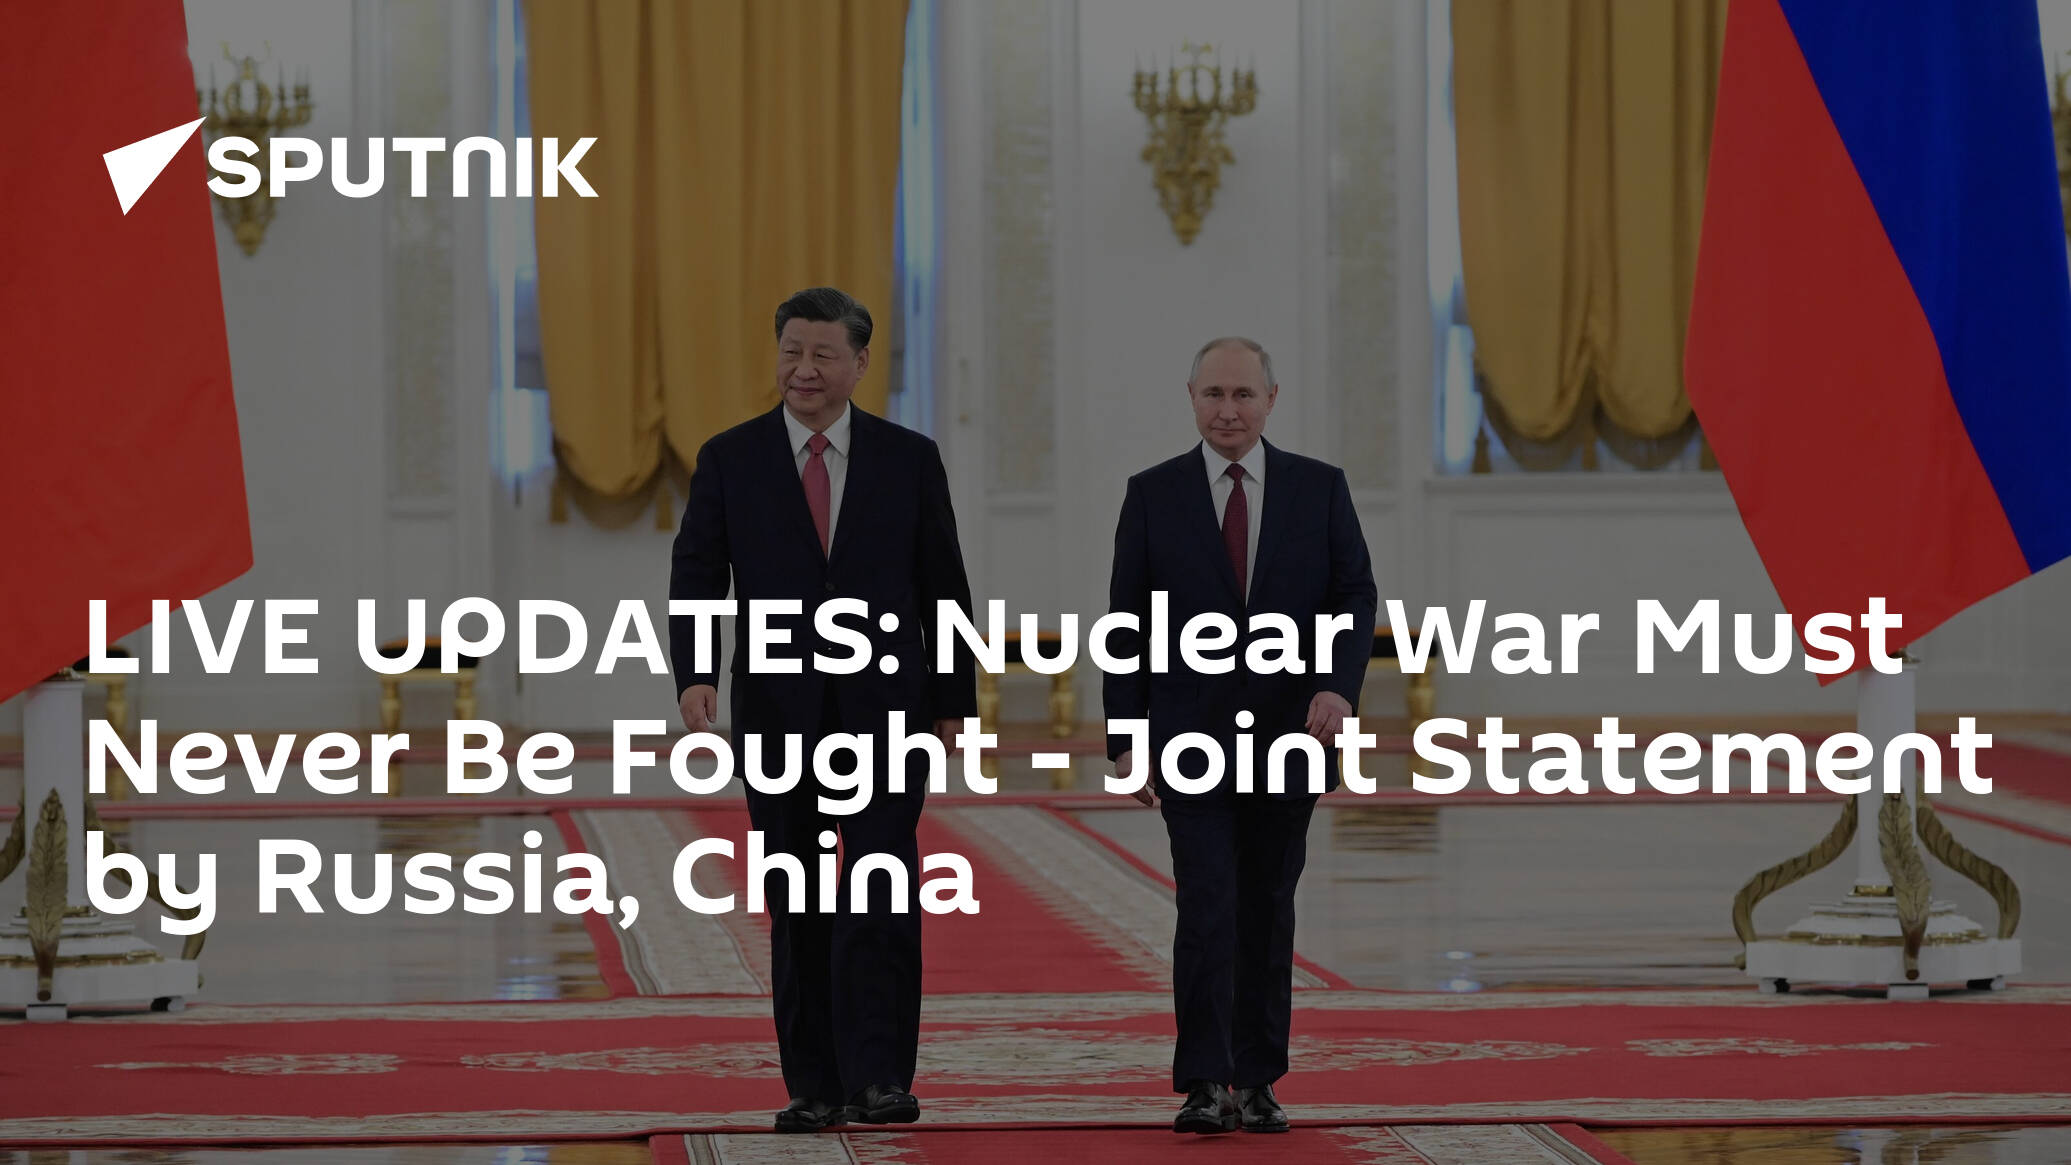 LIVE UPDATES: Nuclear War Must Never Be Fought - Joint Statement by Russia, China